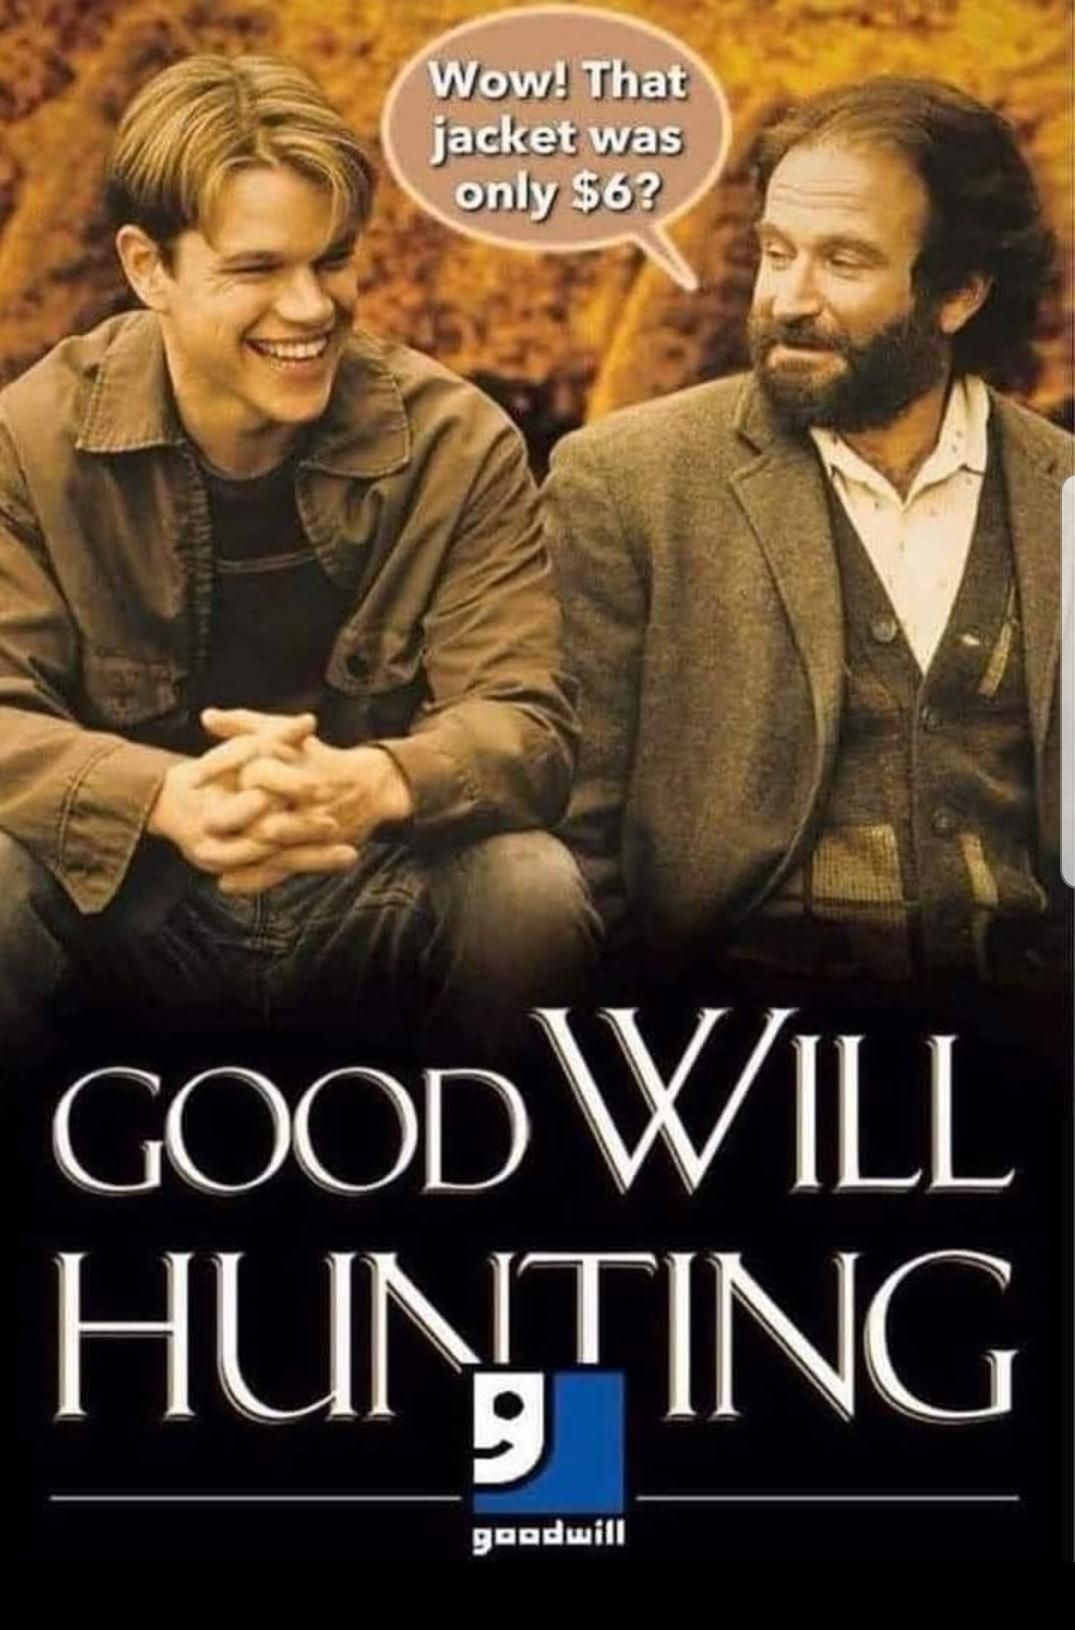 Goodwill Hunting?